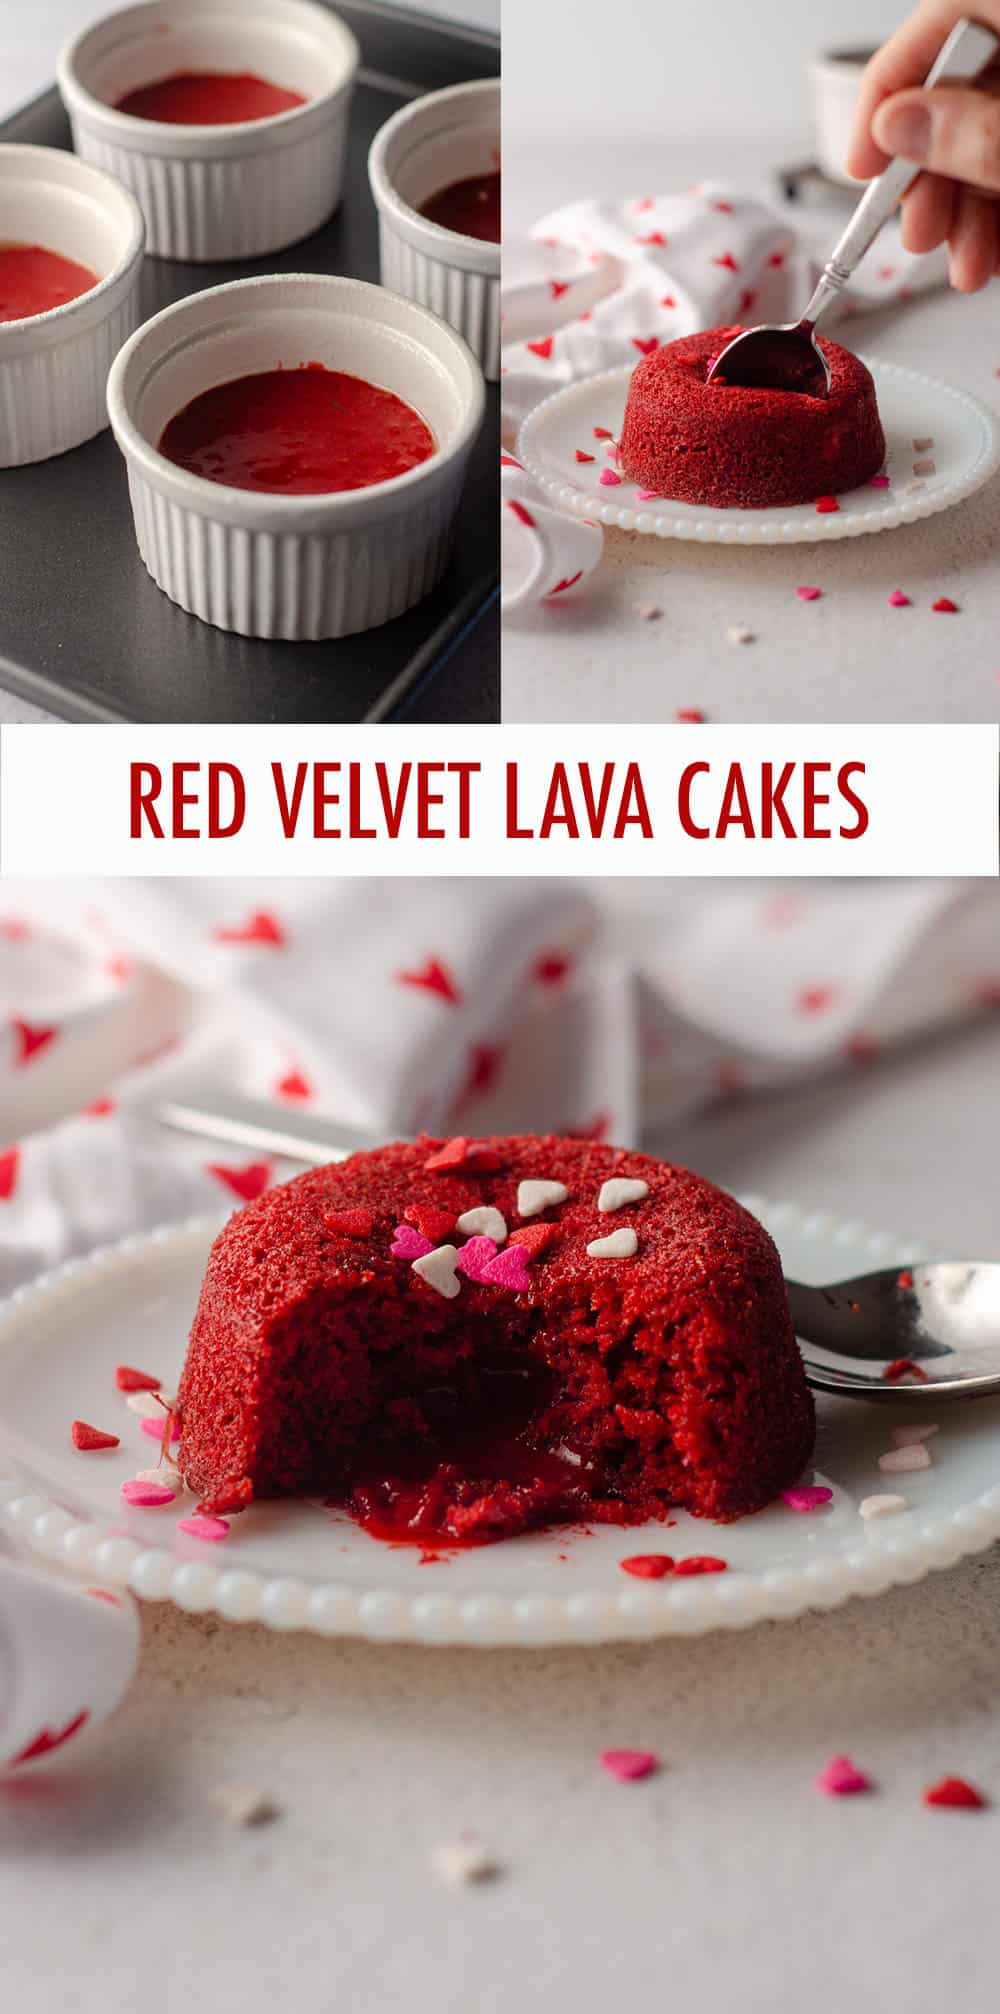 Molten lava cakes made easily from red velvet cake mix are perfect for your Valentine's Day dessert. Recipe makes 4 cakes in ramekins or 6 cakes in a cupcake pan. via @frshaprilflours